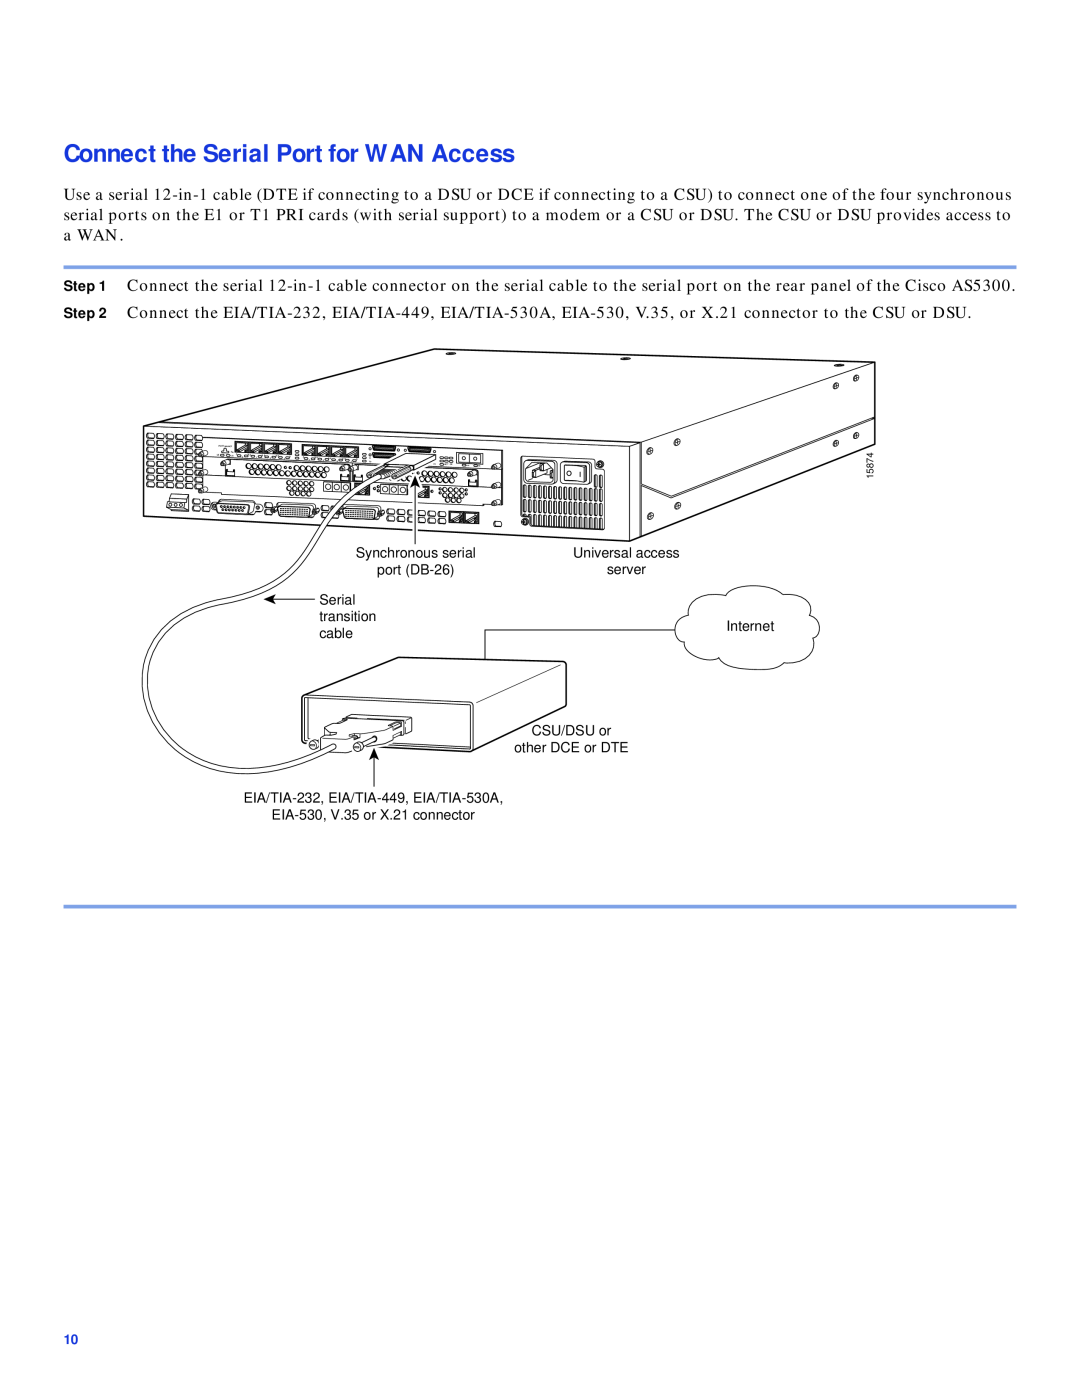 Cisco Systems AS5300 Connect the Serial Port for WAN Access, transition, Internet, cable, EIA-530, V.35 or X.21 connector 